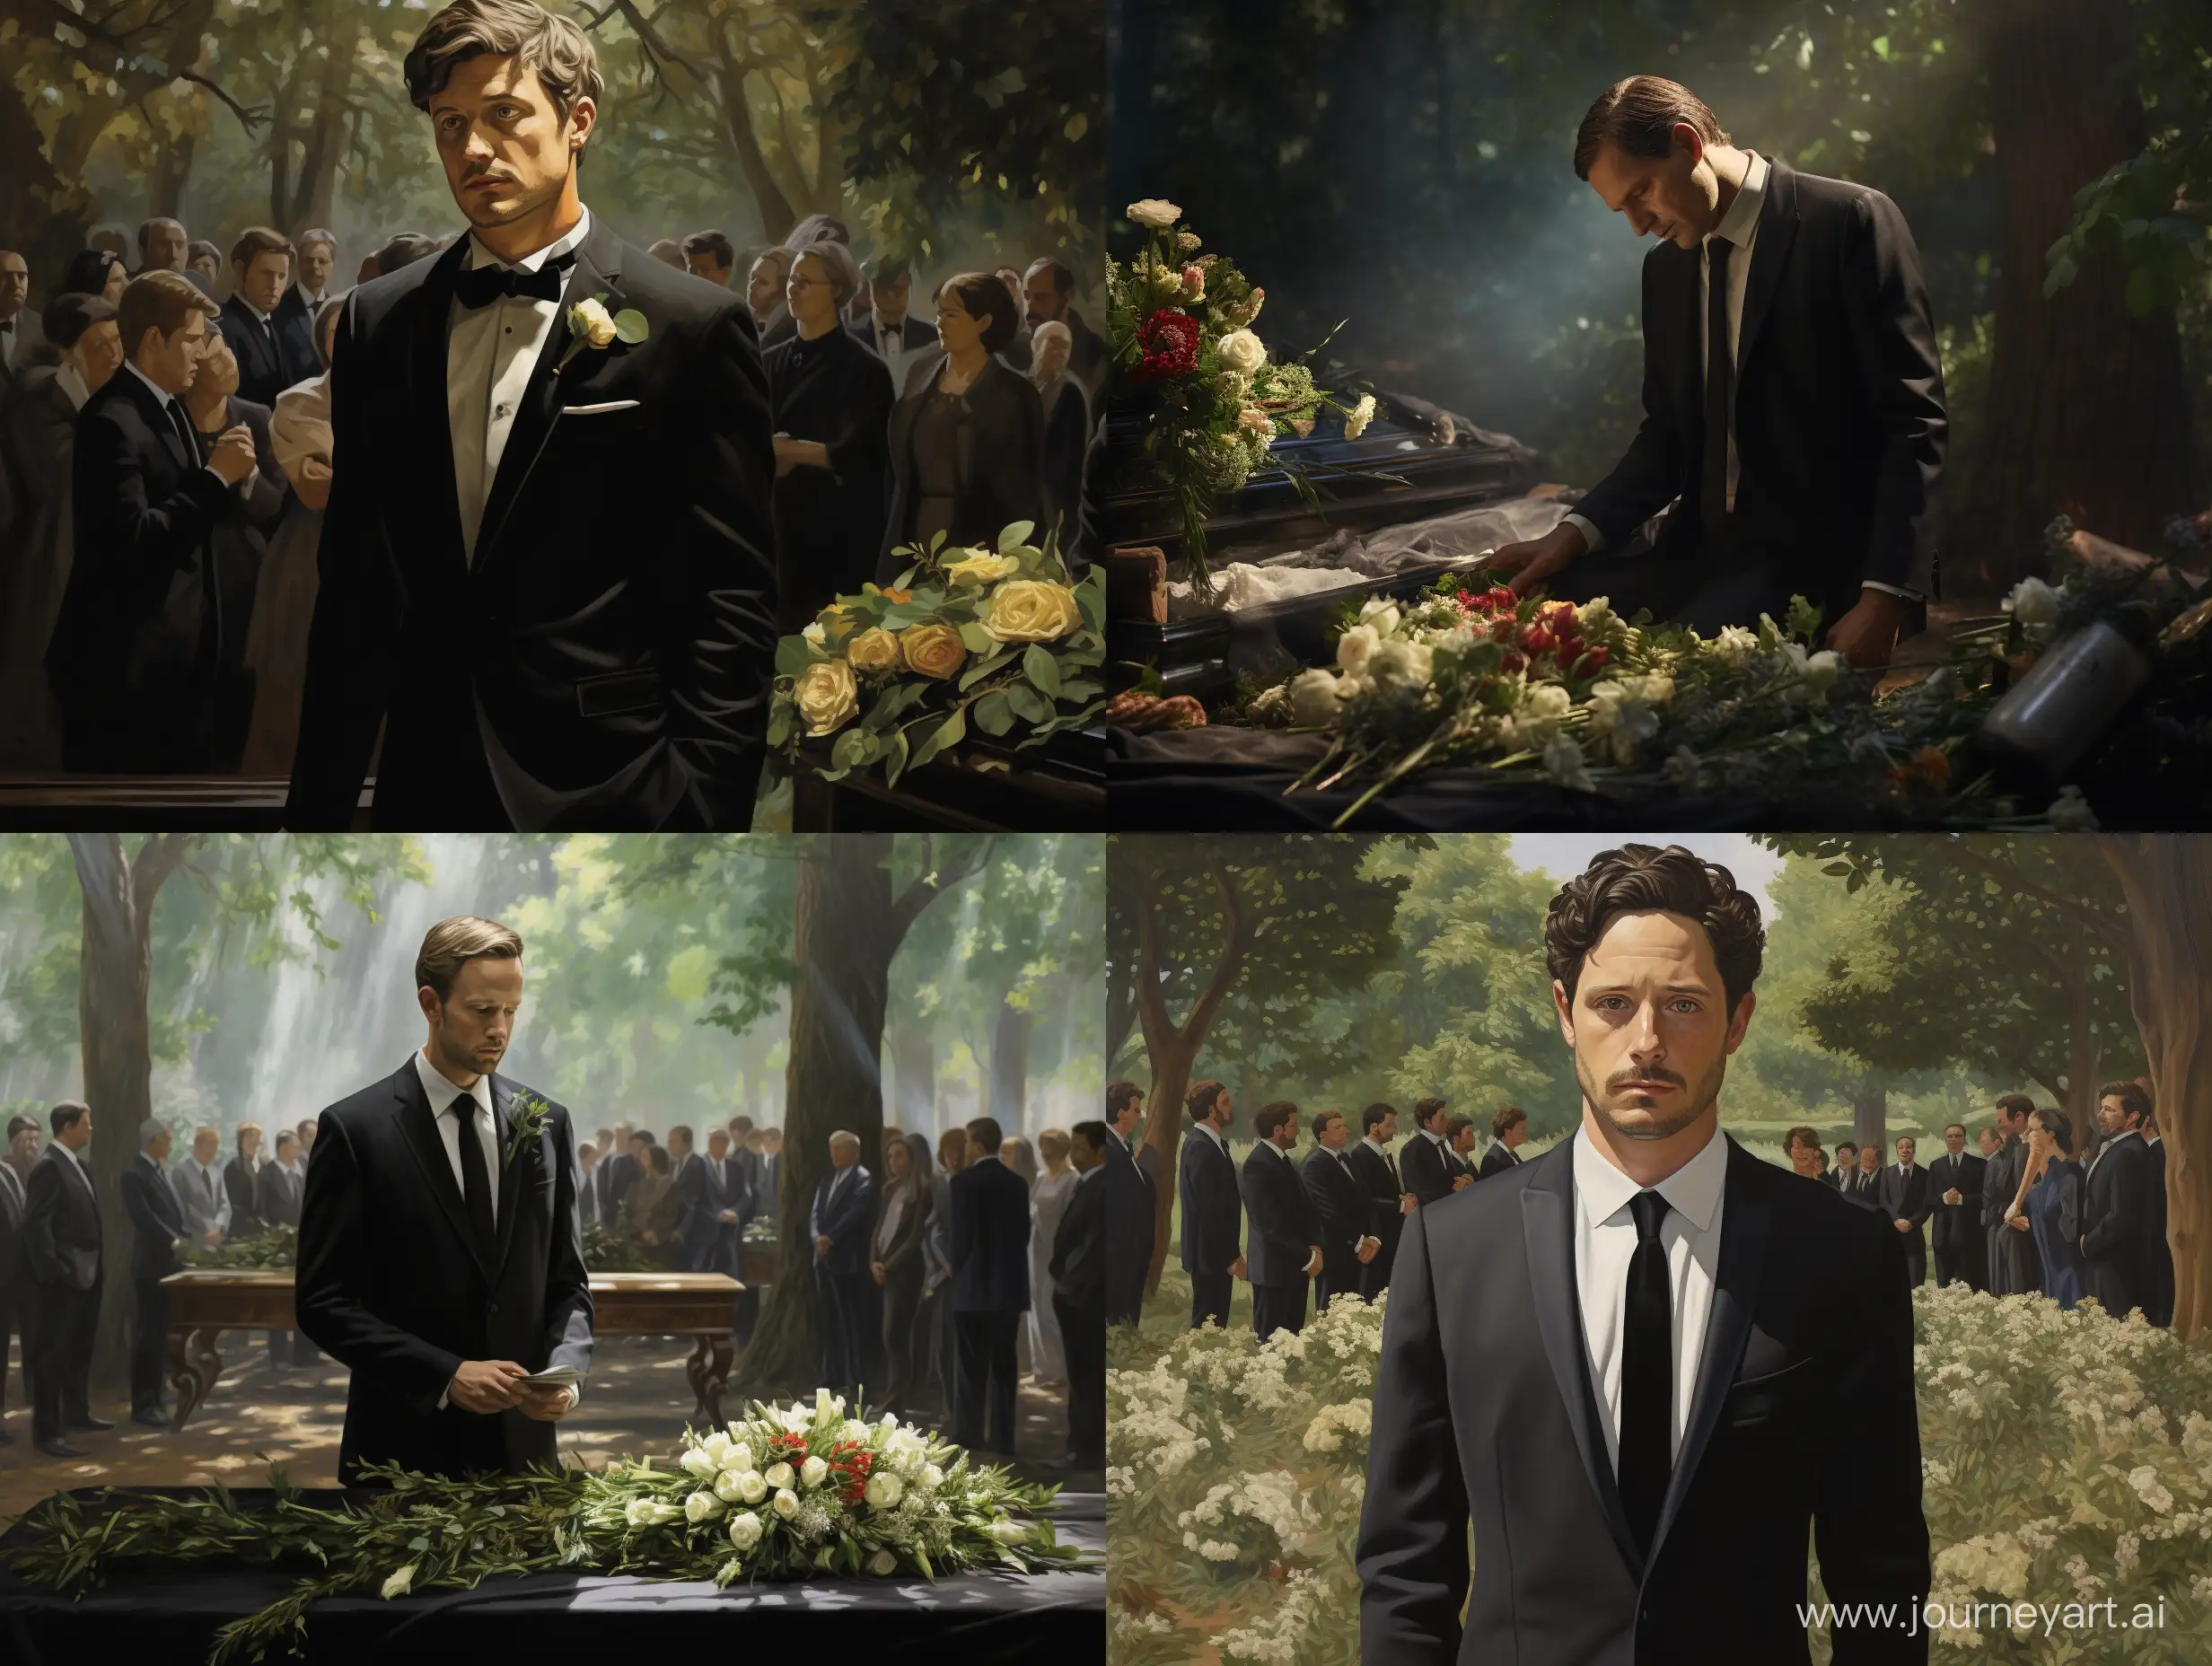 Man-Mourning-at-Wifes-Funeral-Ceremony